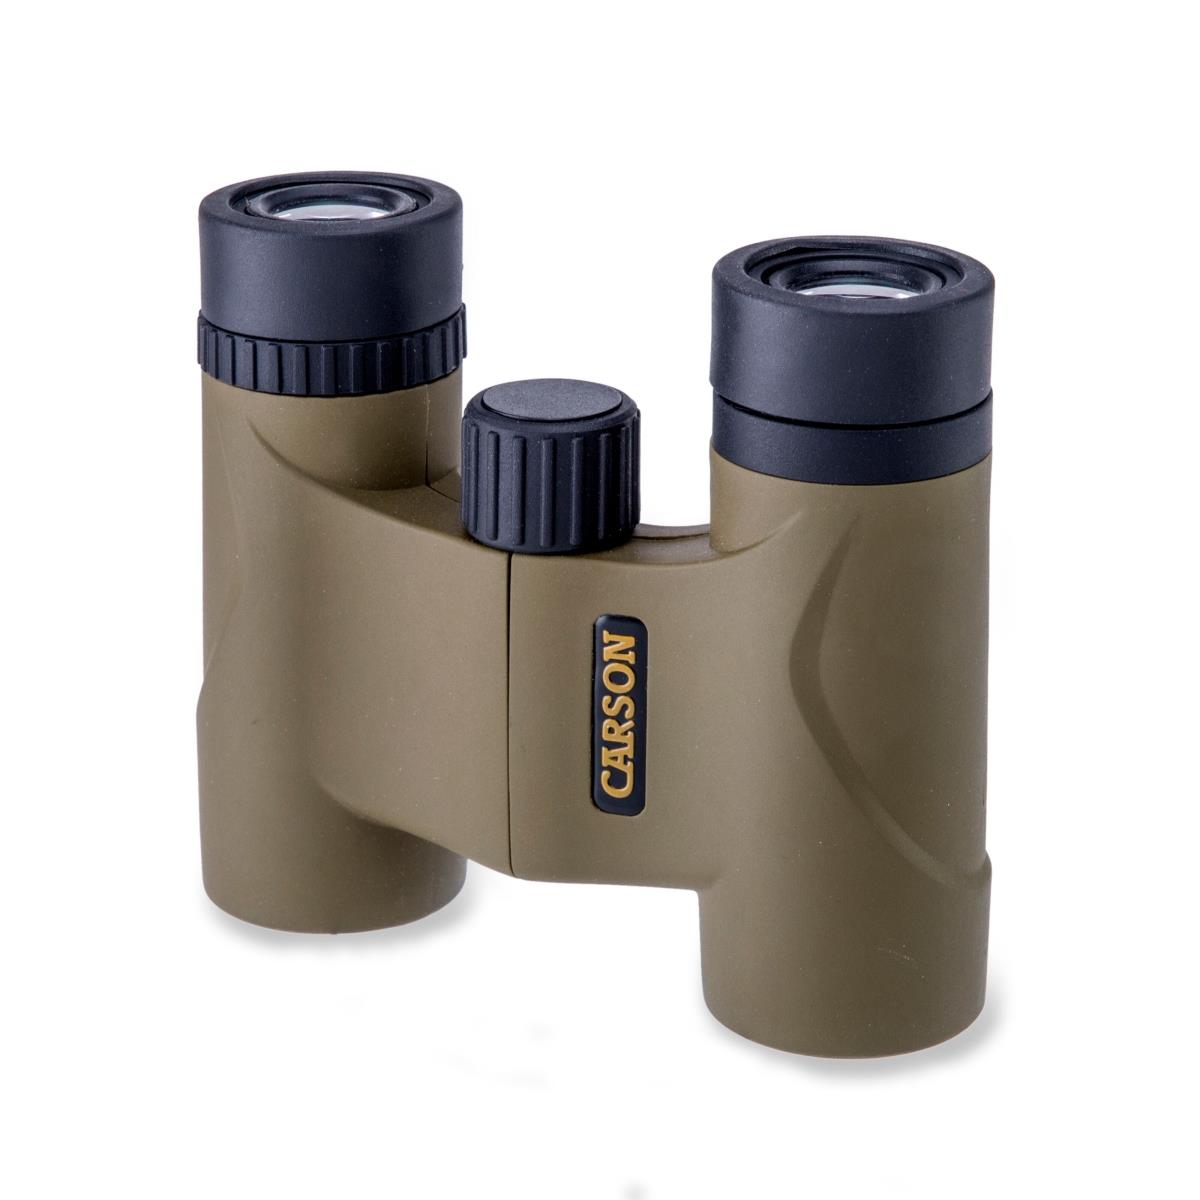 Picture of Carson HW-822 8 x 22 mm Stinger Compact Binocular